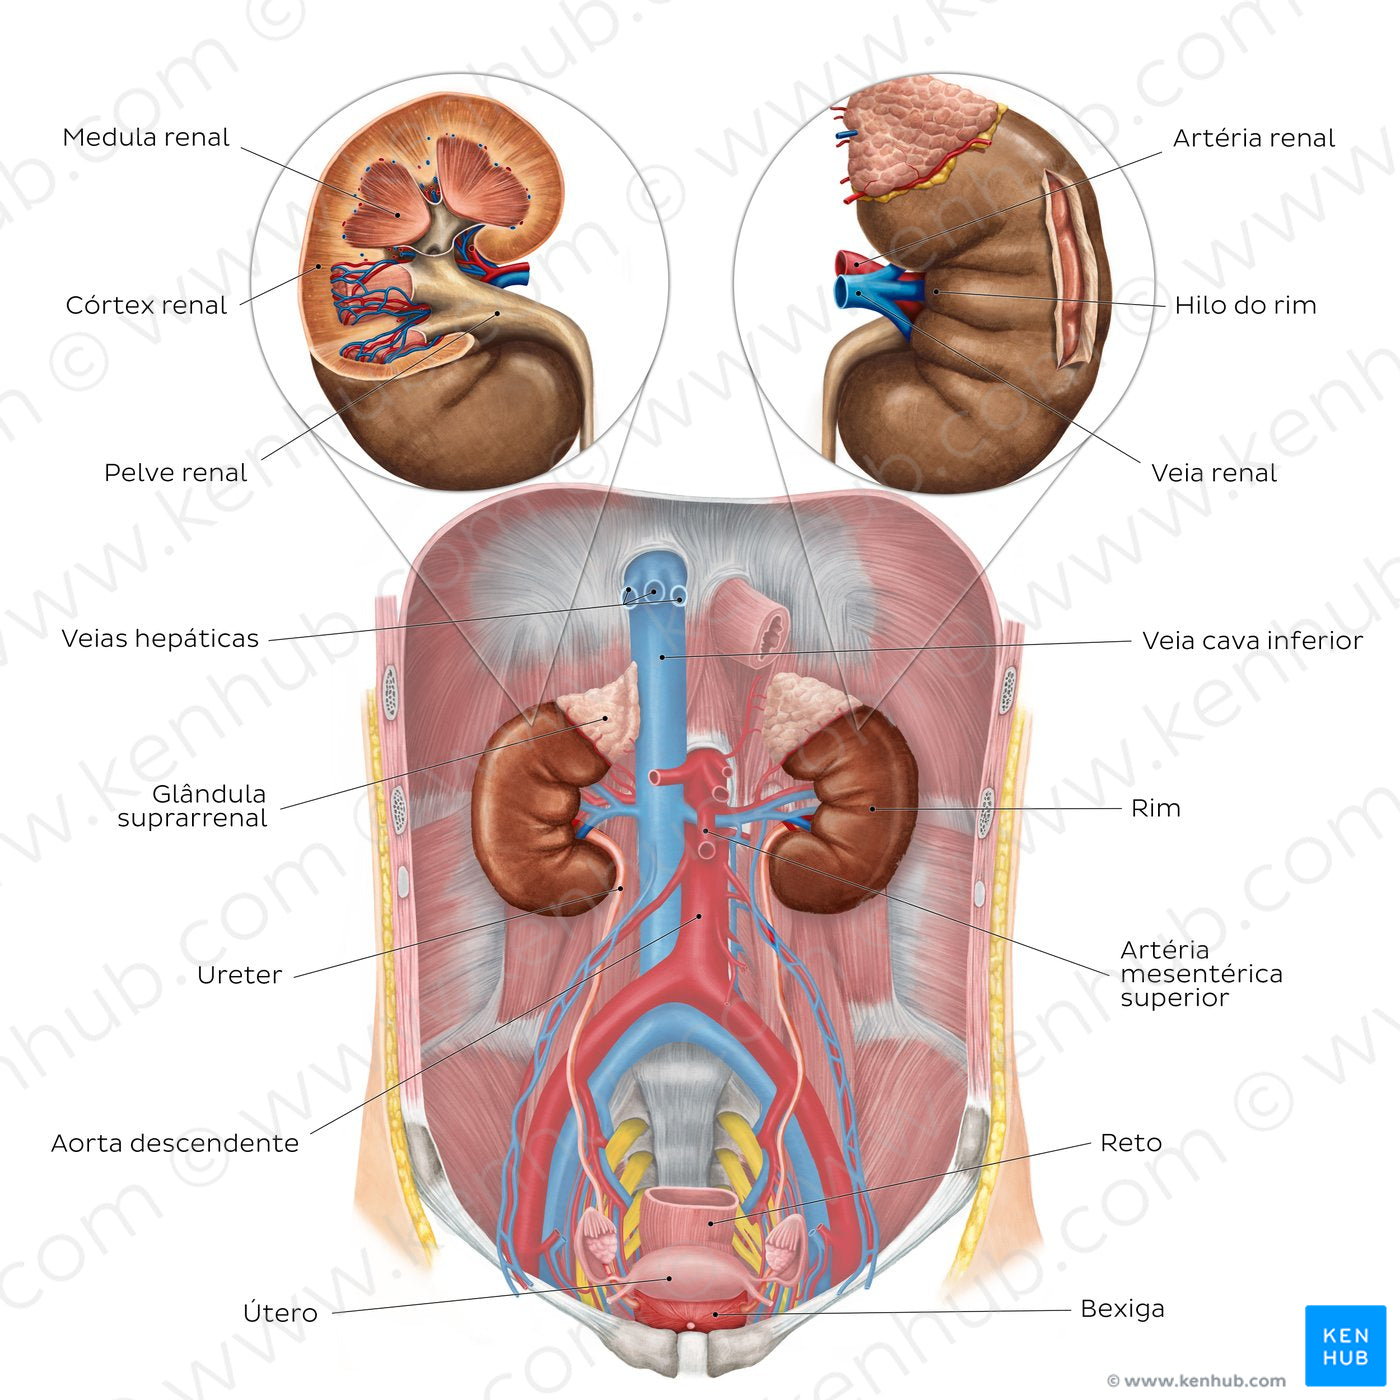 Urinary system - Overview (Portuguese)